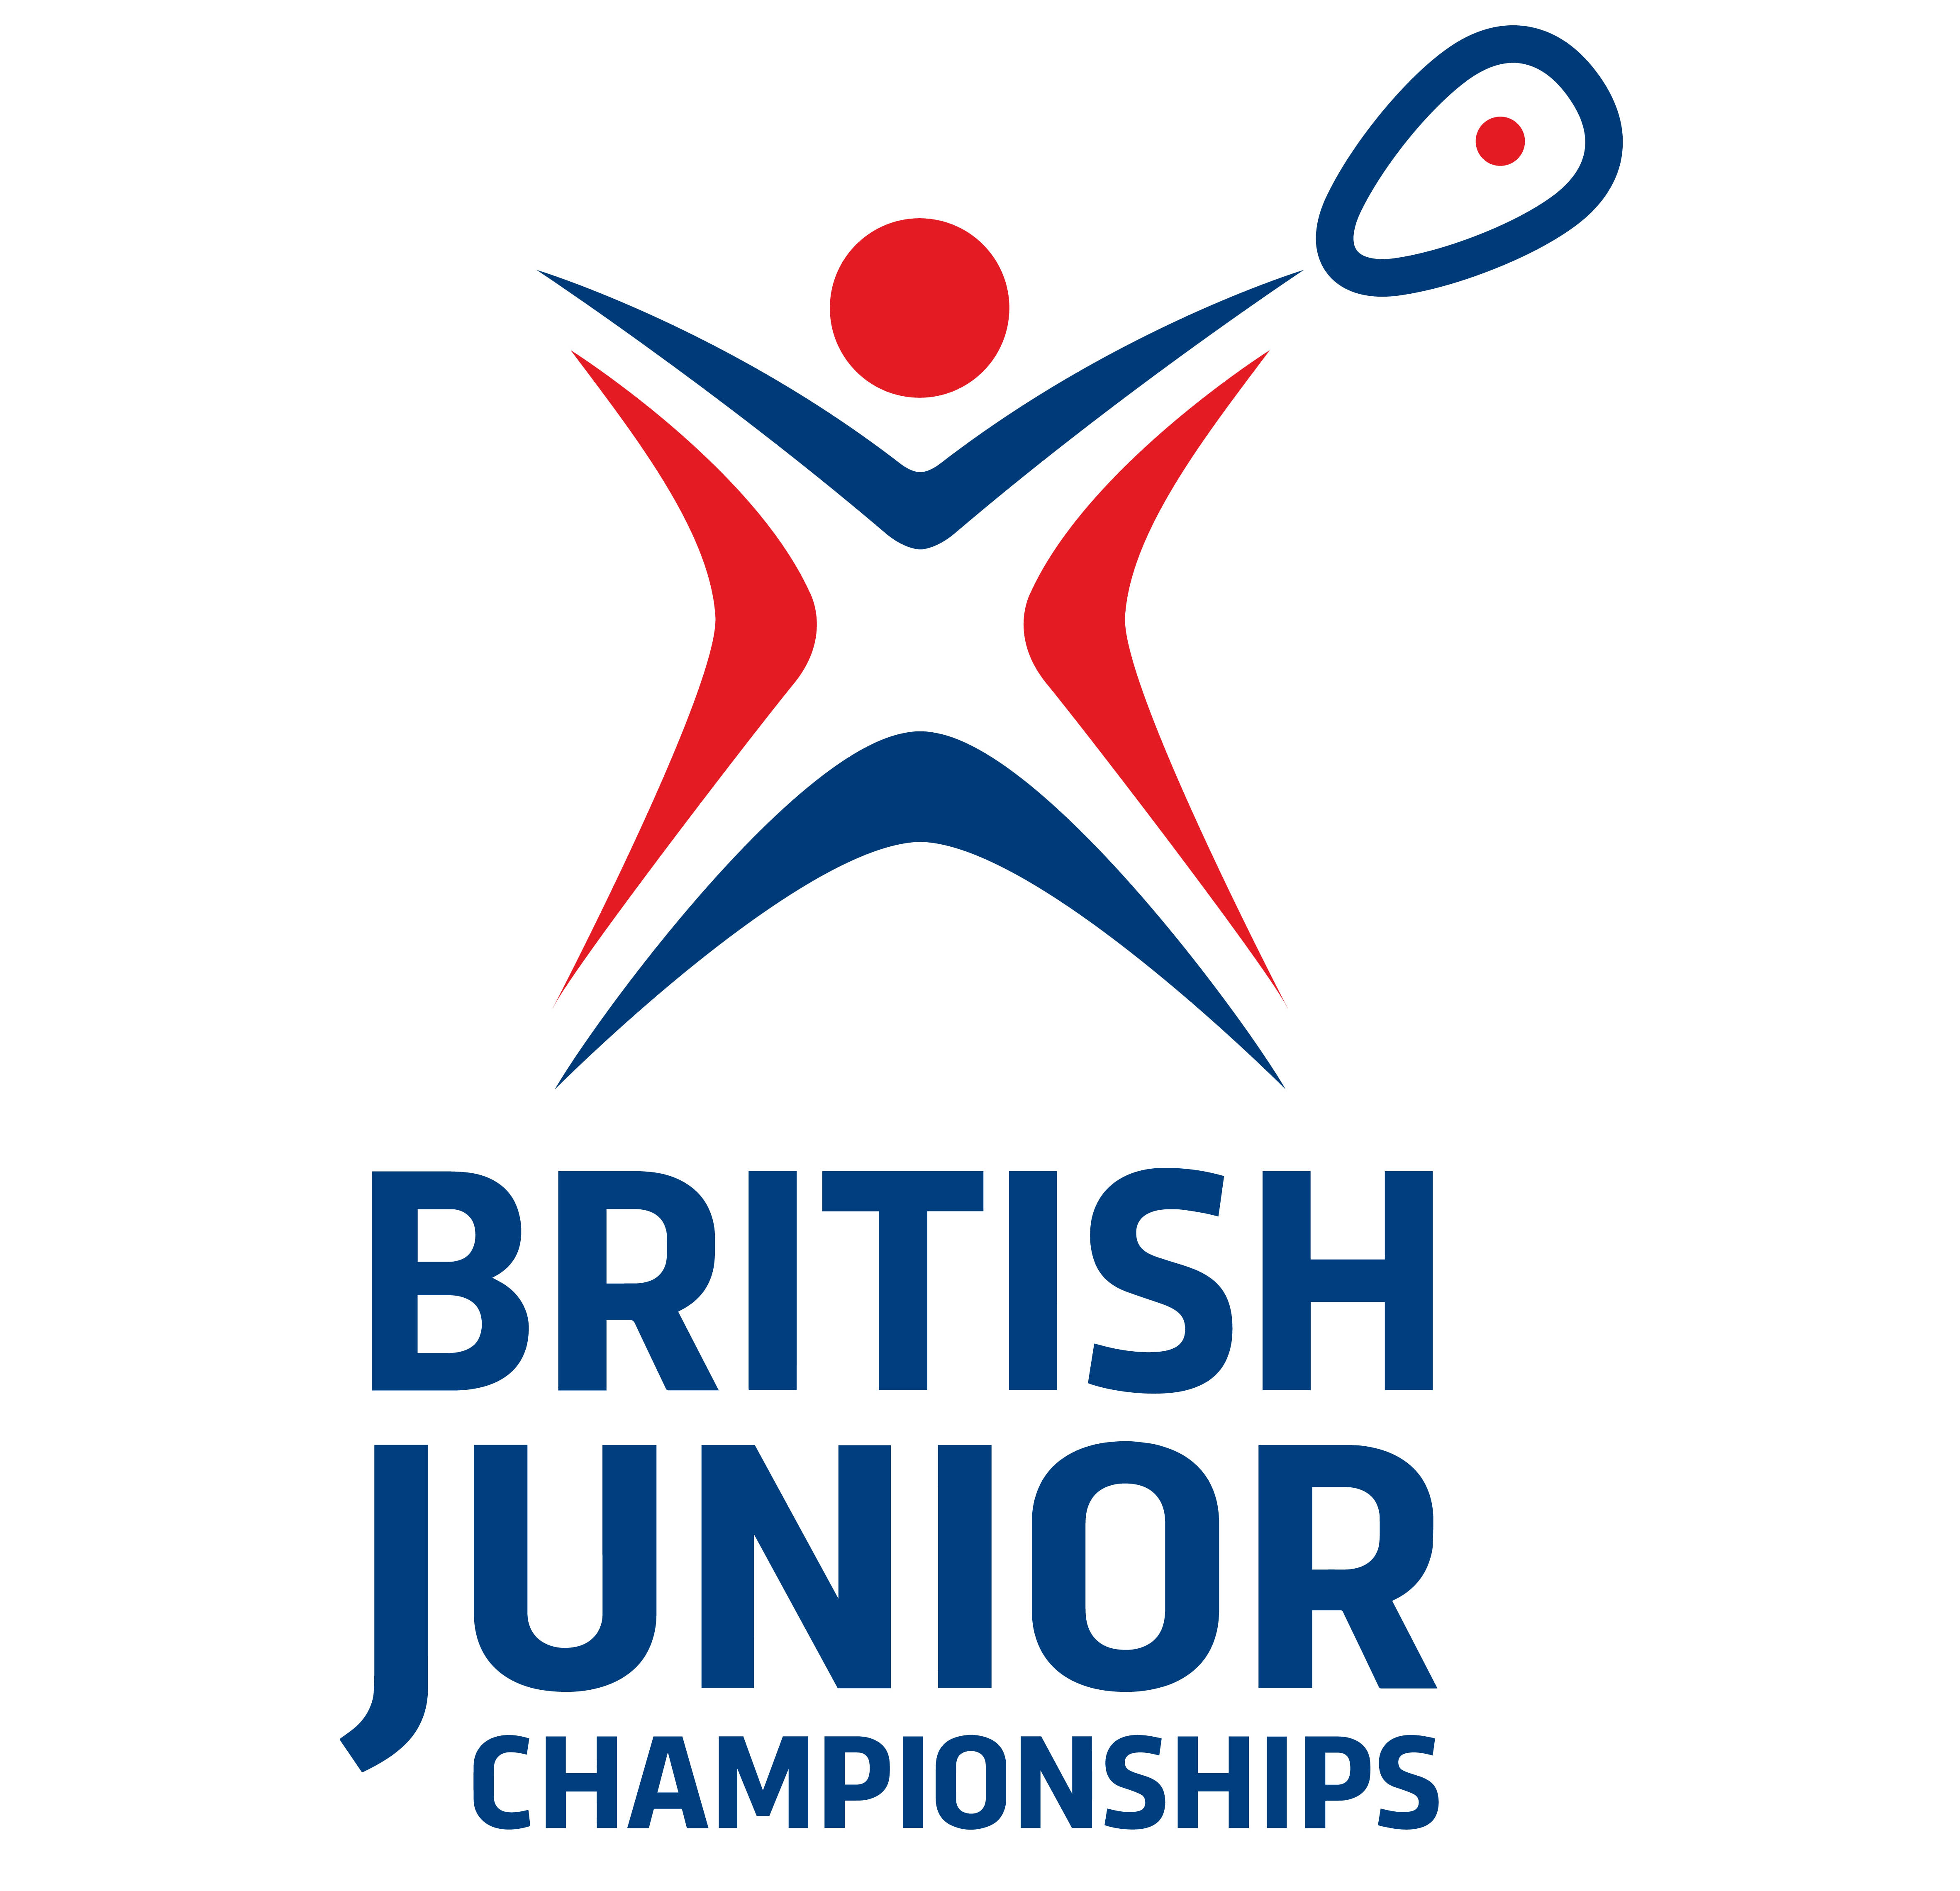 The British Junior Championships will be held in Manchester from 26 to 29 October